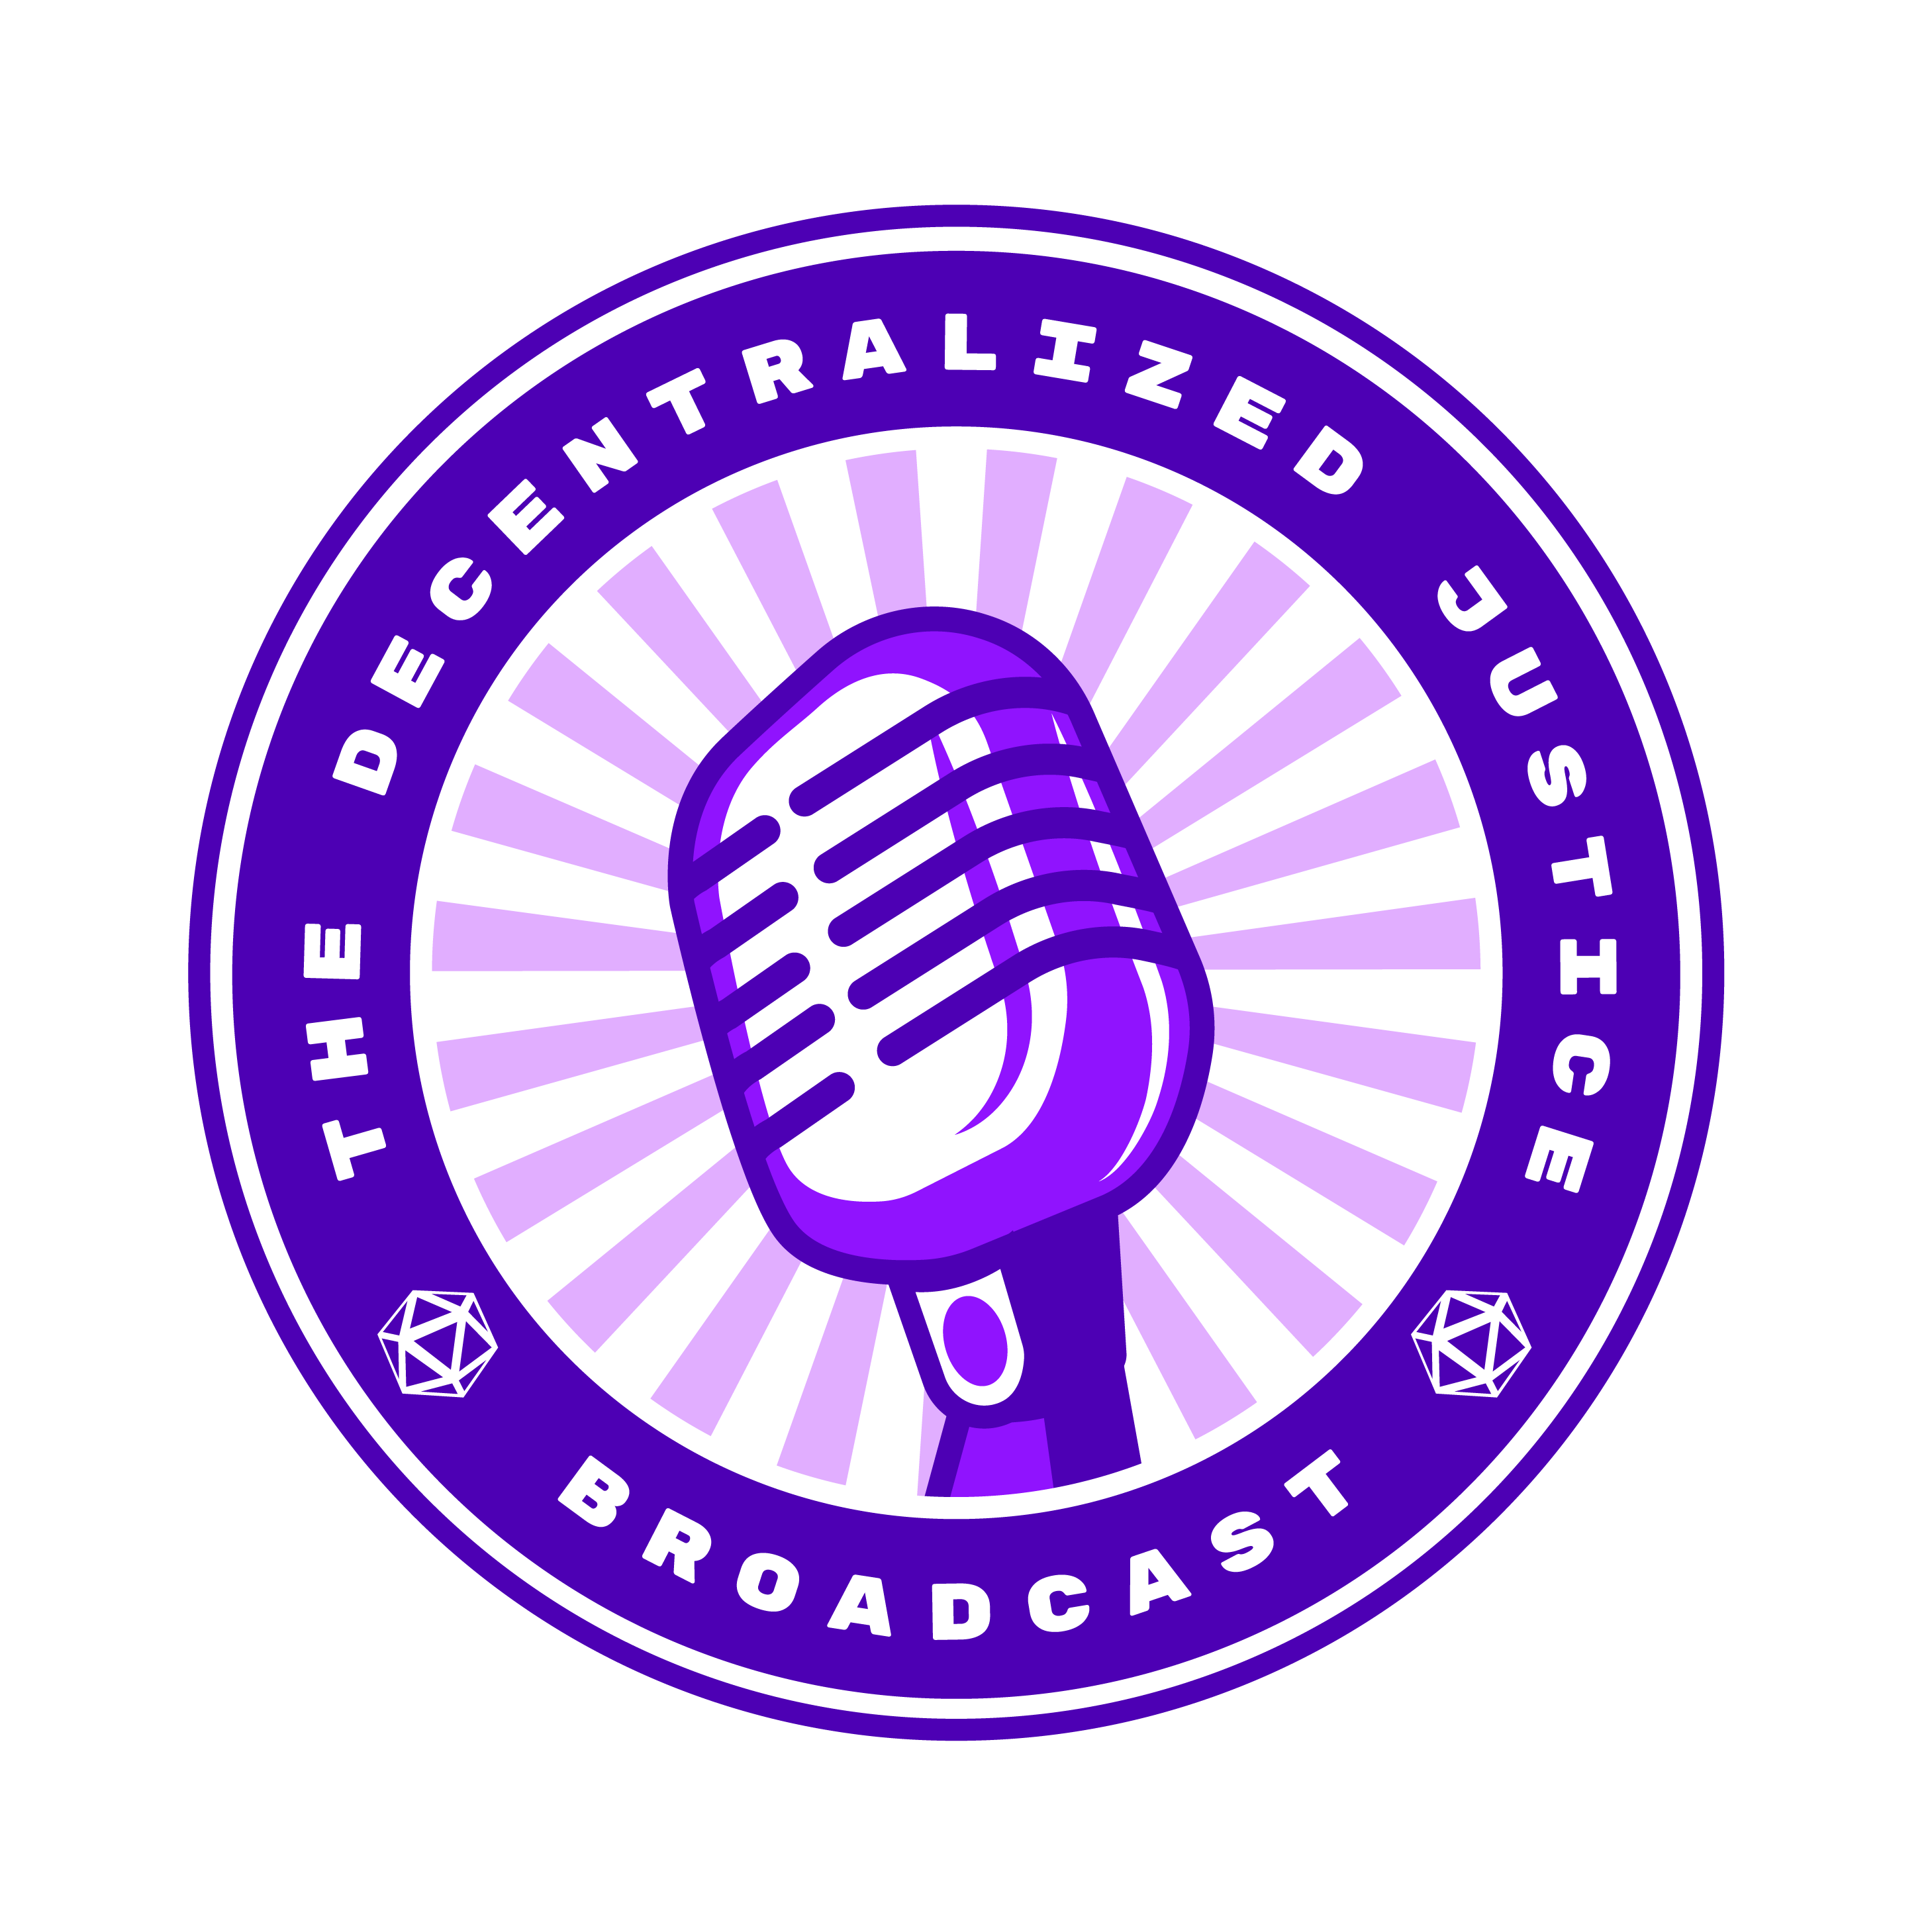 The Decentralized Justice Broadcast